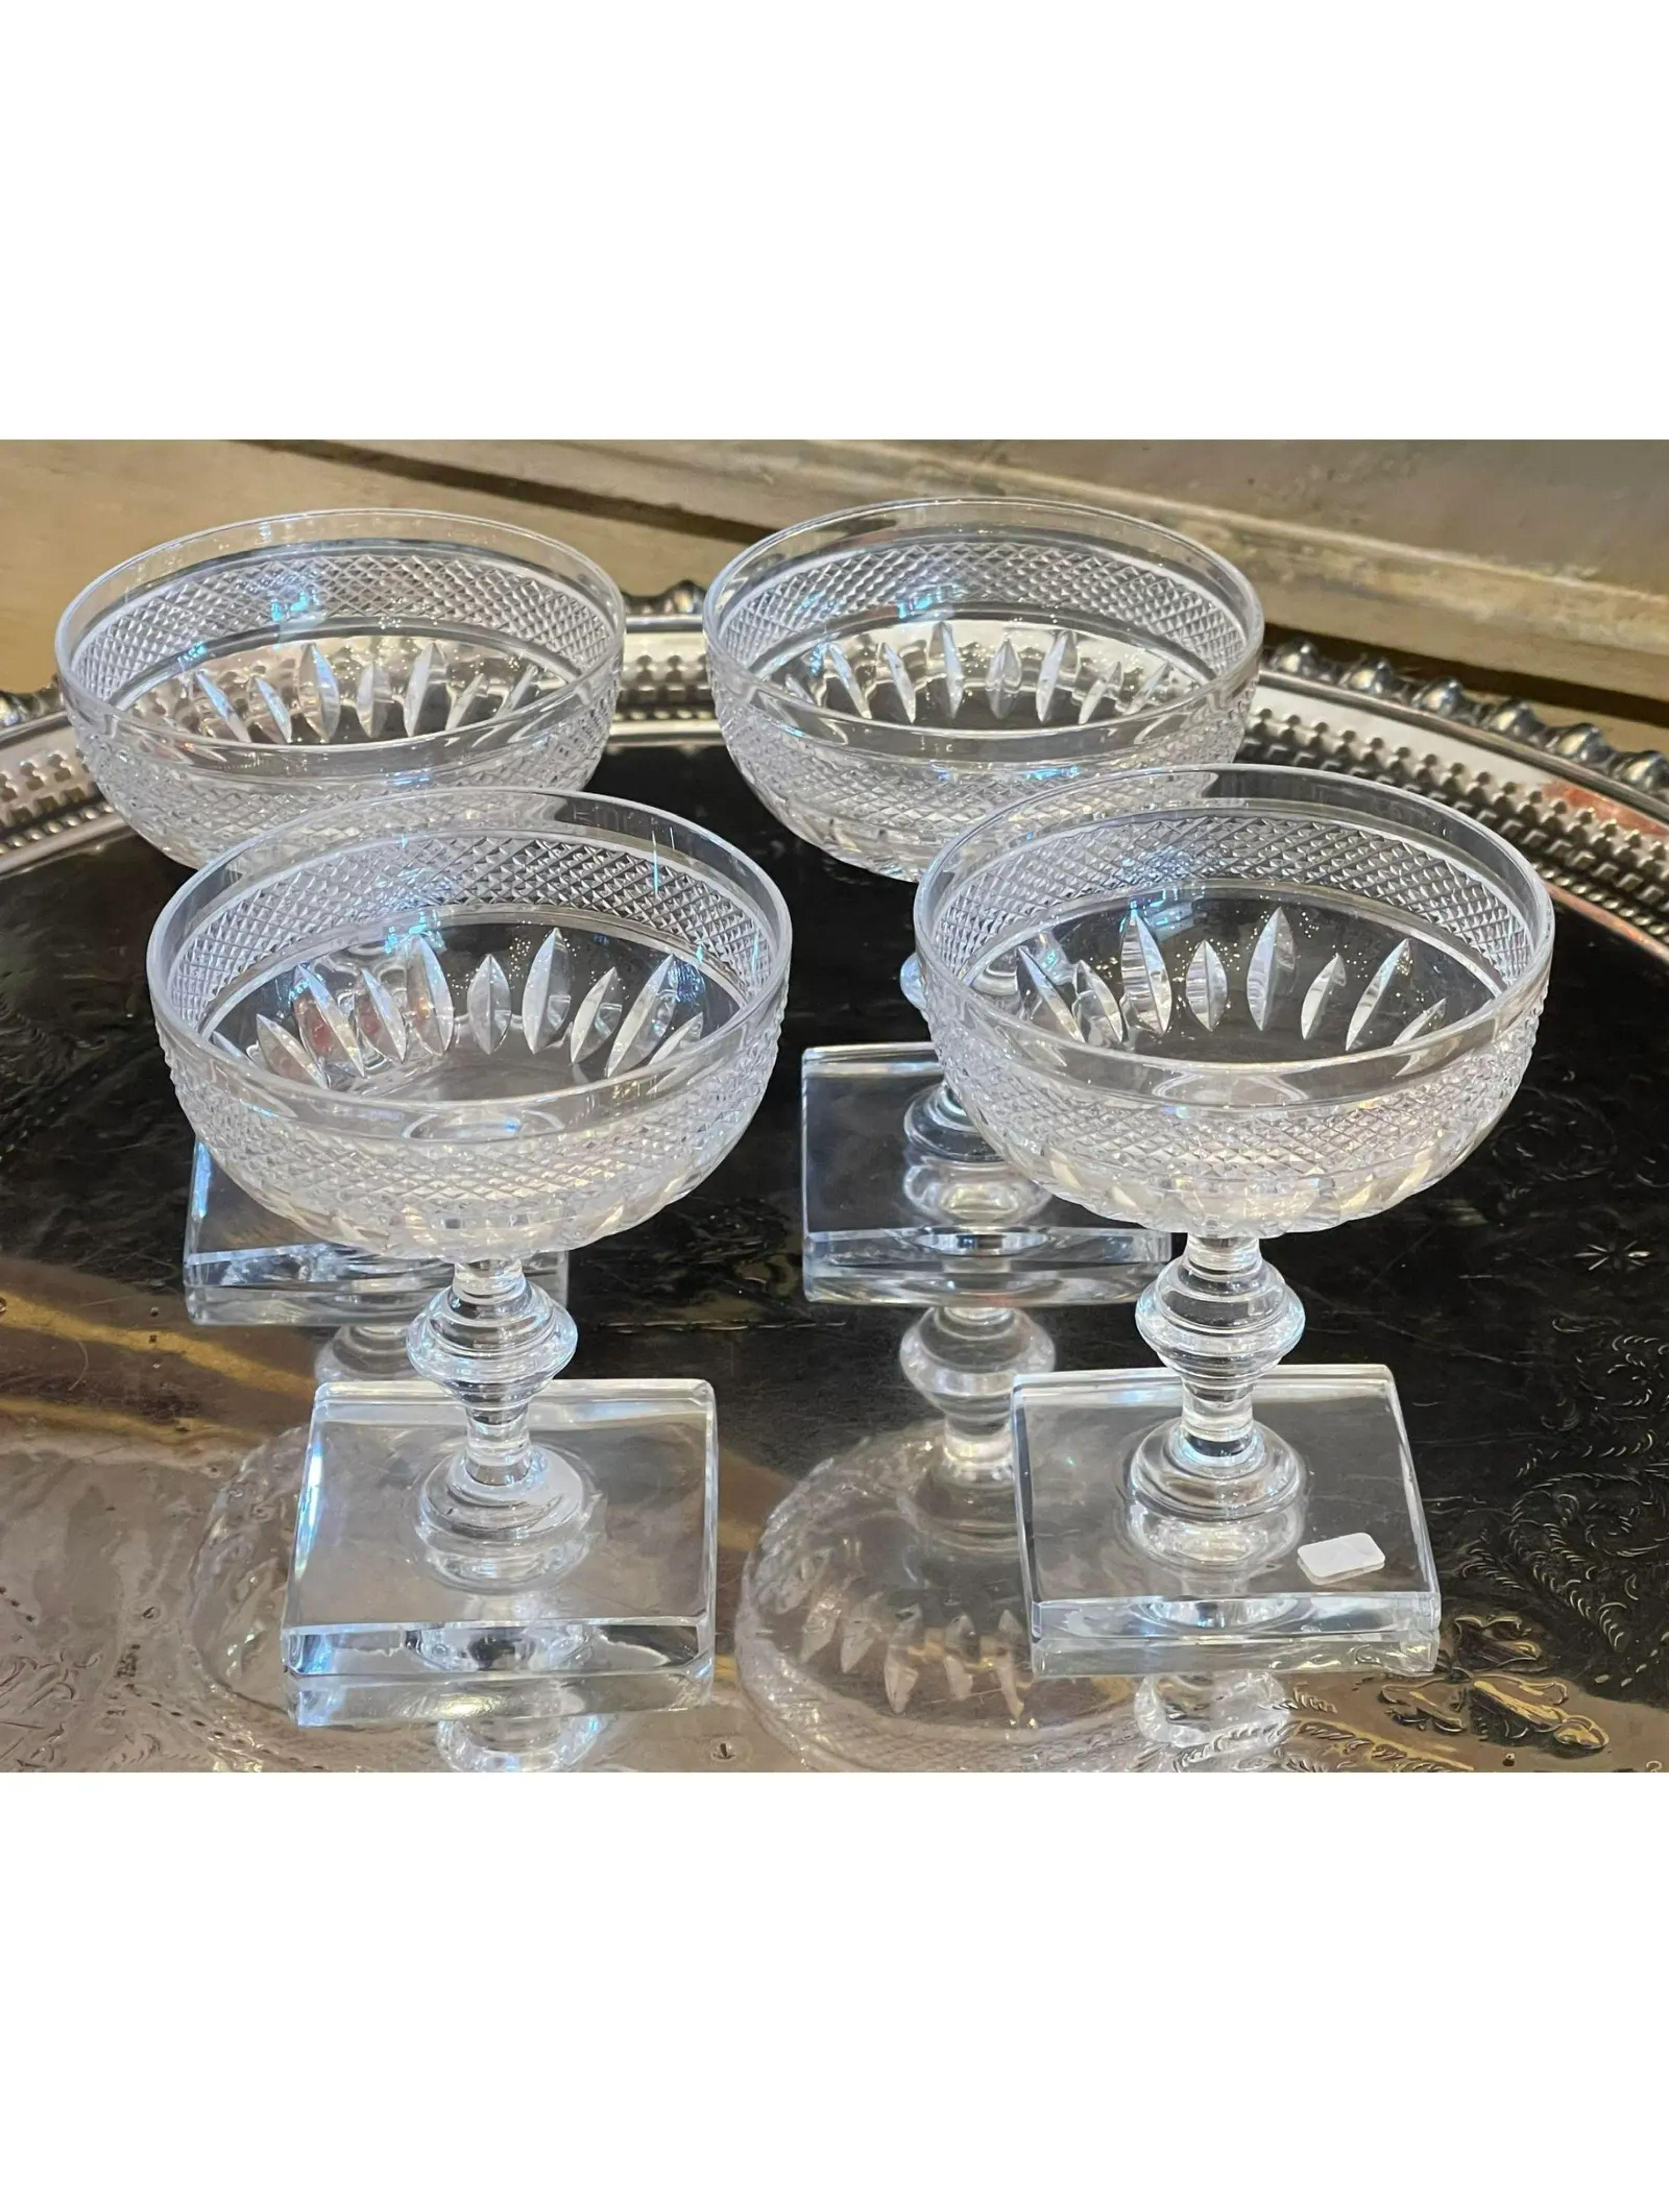 Antique Art Deco Hawkes Square Base Champagne Wine Stem Coupes - Set of 4

Additional information: 
Materials: Crystal
Color: Transparent
Period: Early 20th Century
Styles: Art Deco
Item Type: Vintage, Antique or Pre-owned
Dimensions: 3.75